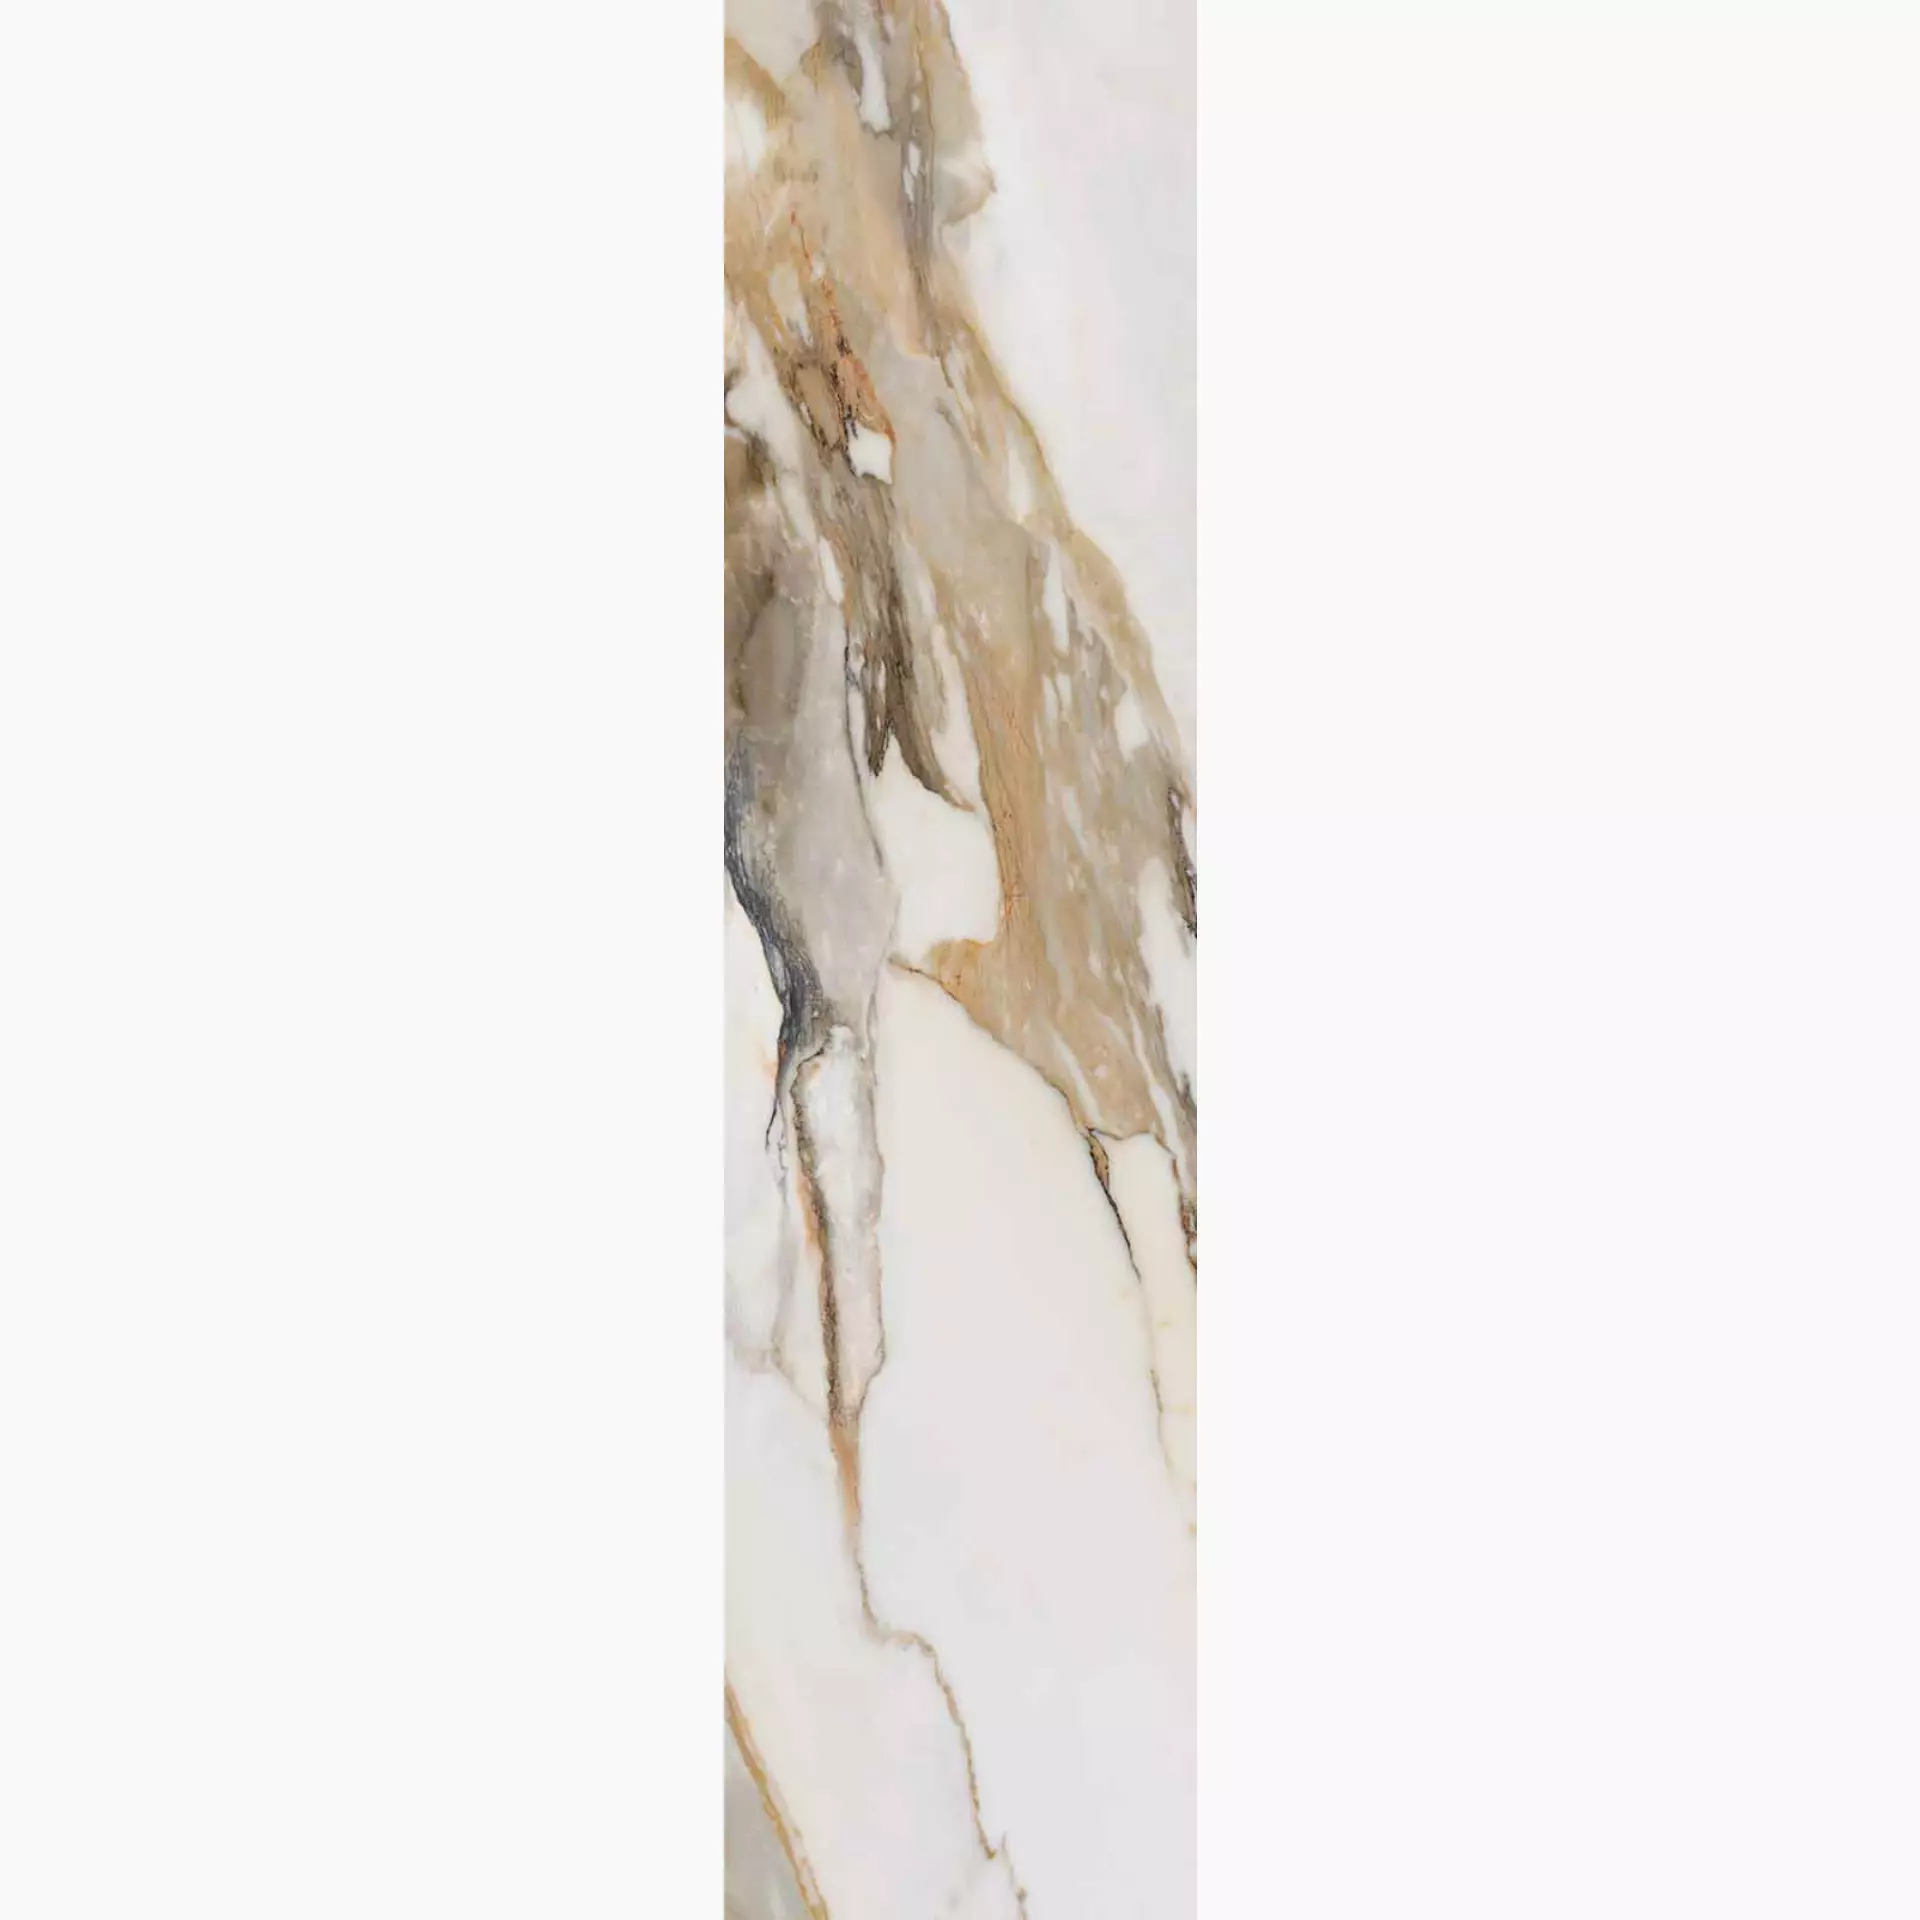 Keope 9Cento Alba Oro Lappato 46394535 30x120cm rectified 9mm